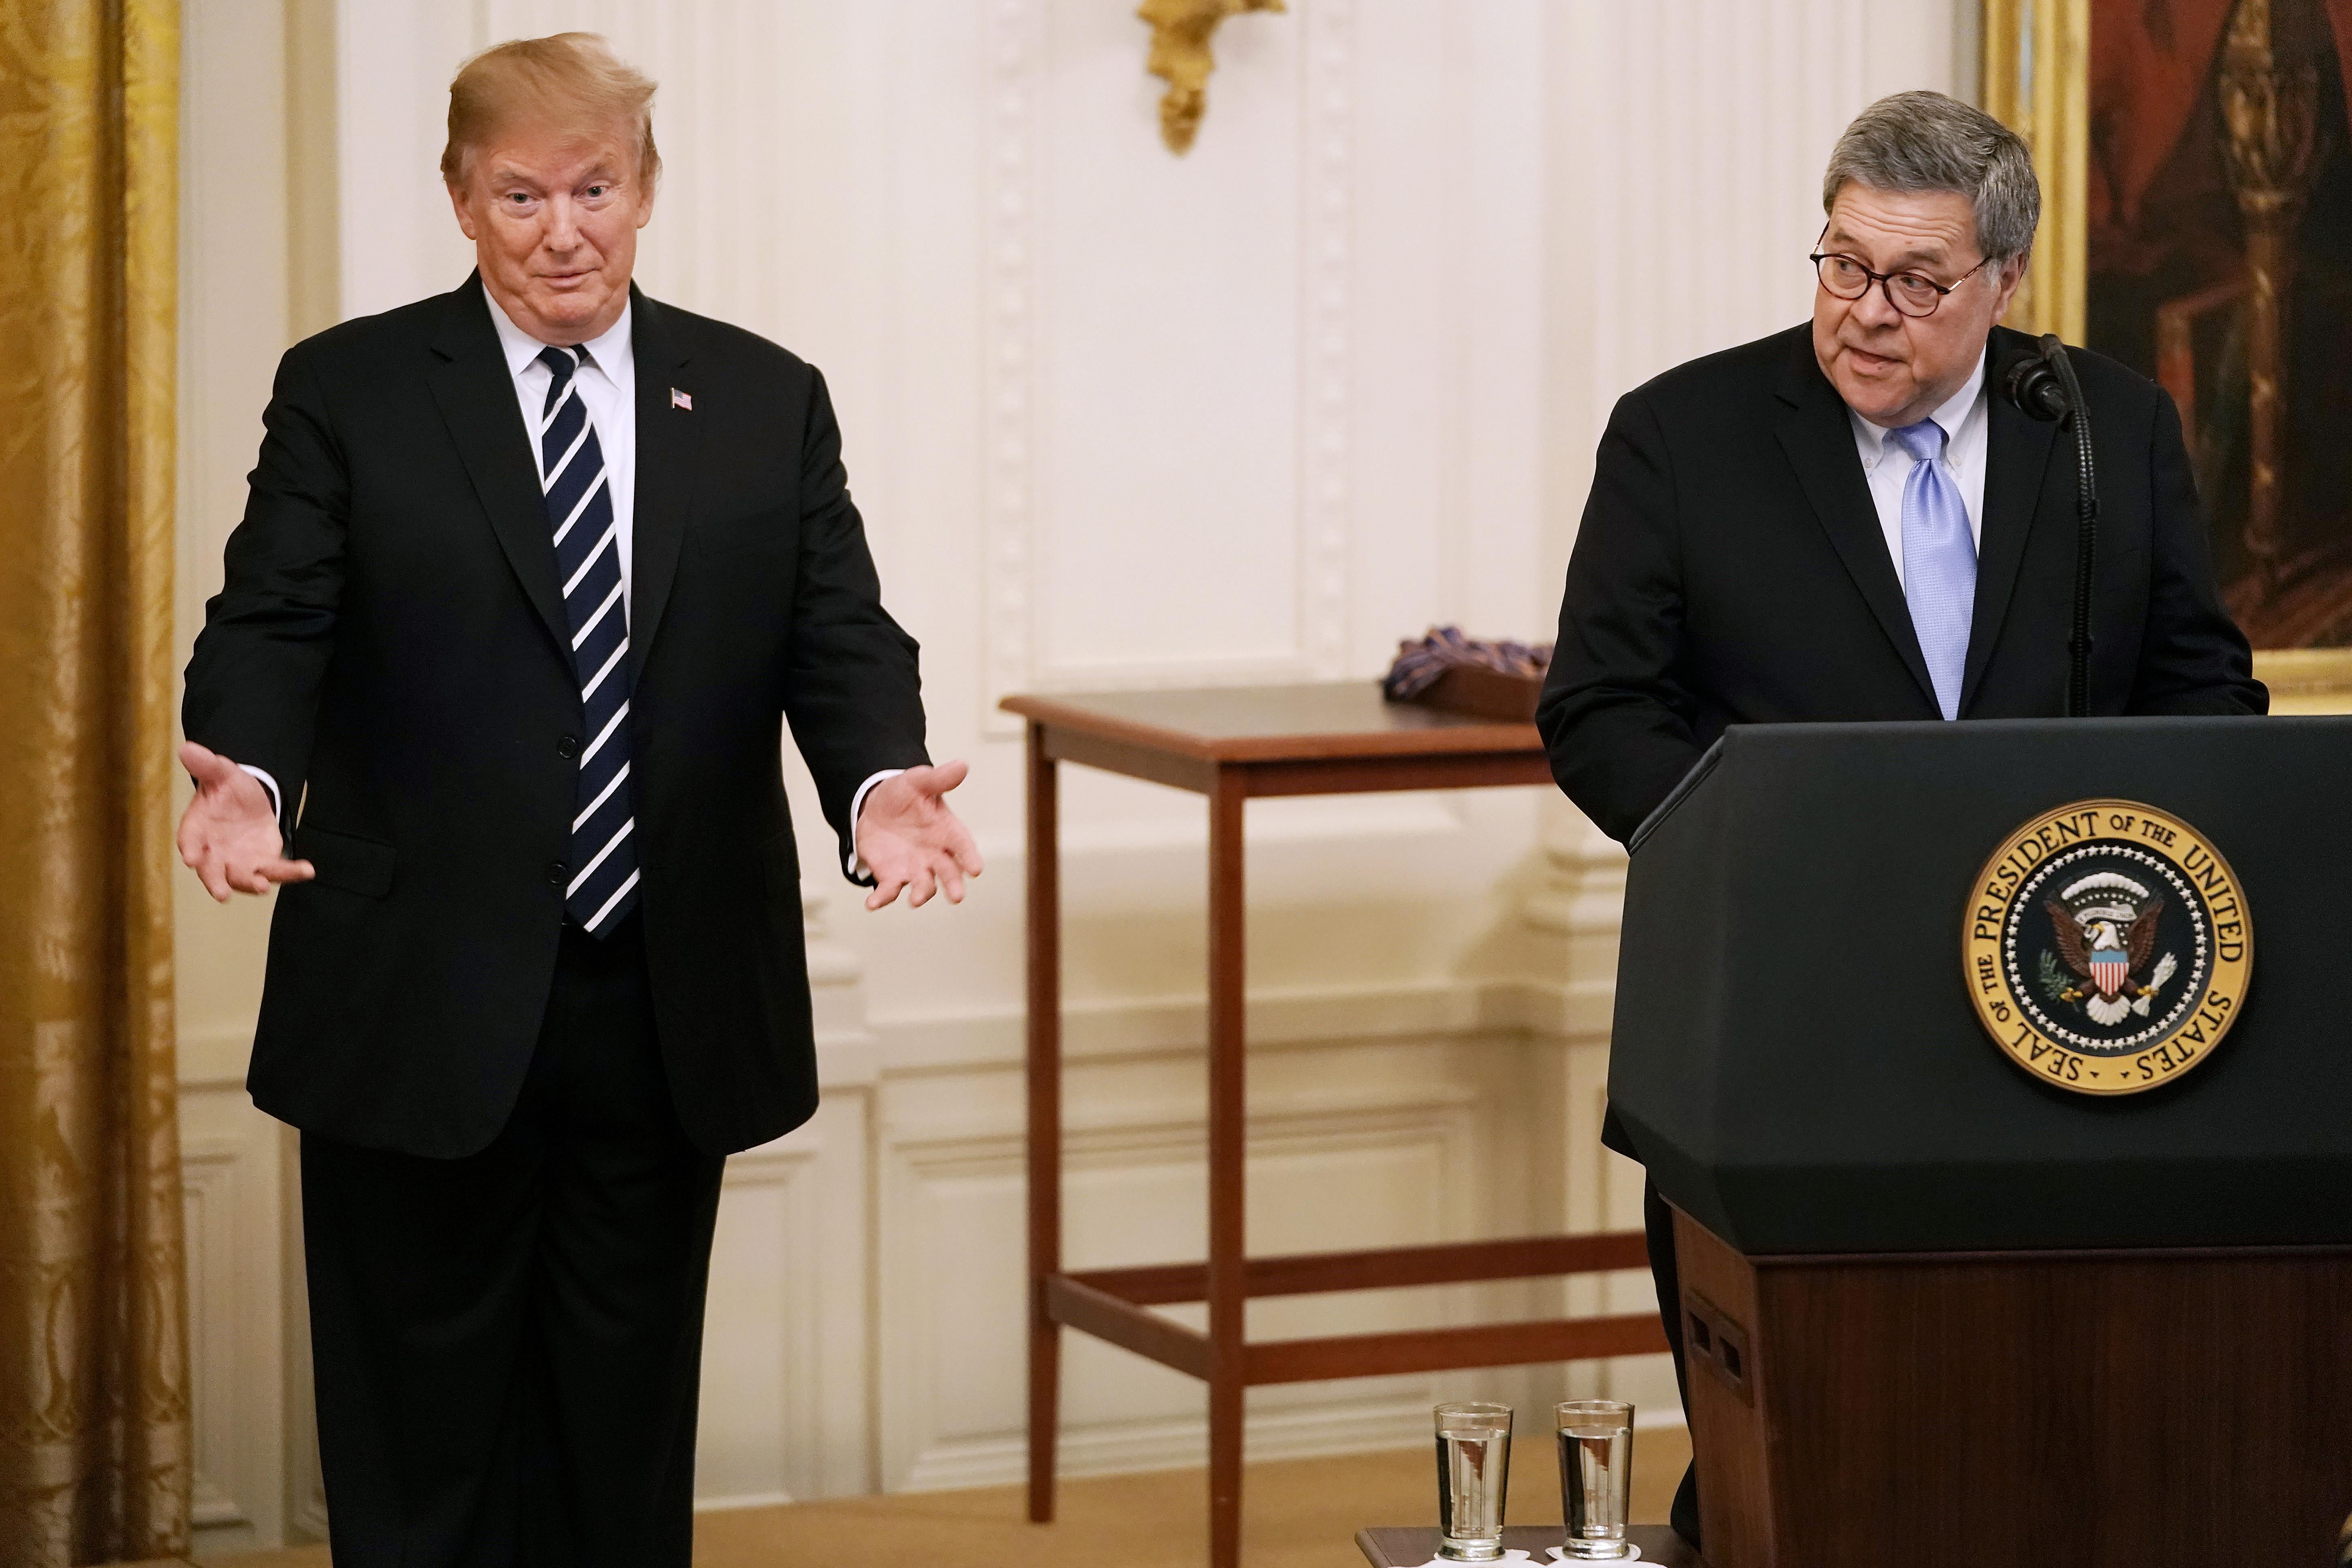 President Donald Trump listens to Attorney General William Barr during a ceremony in the East Room of the White House May 22, 2019 in Washington, D.C. 